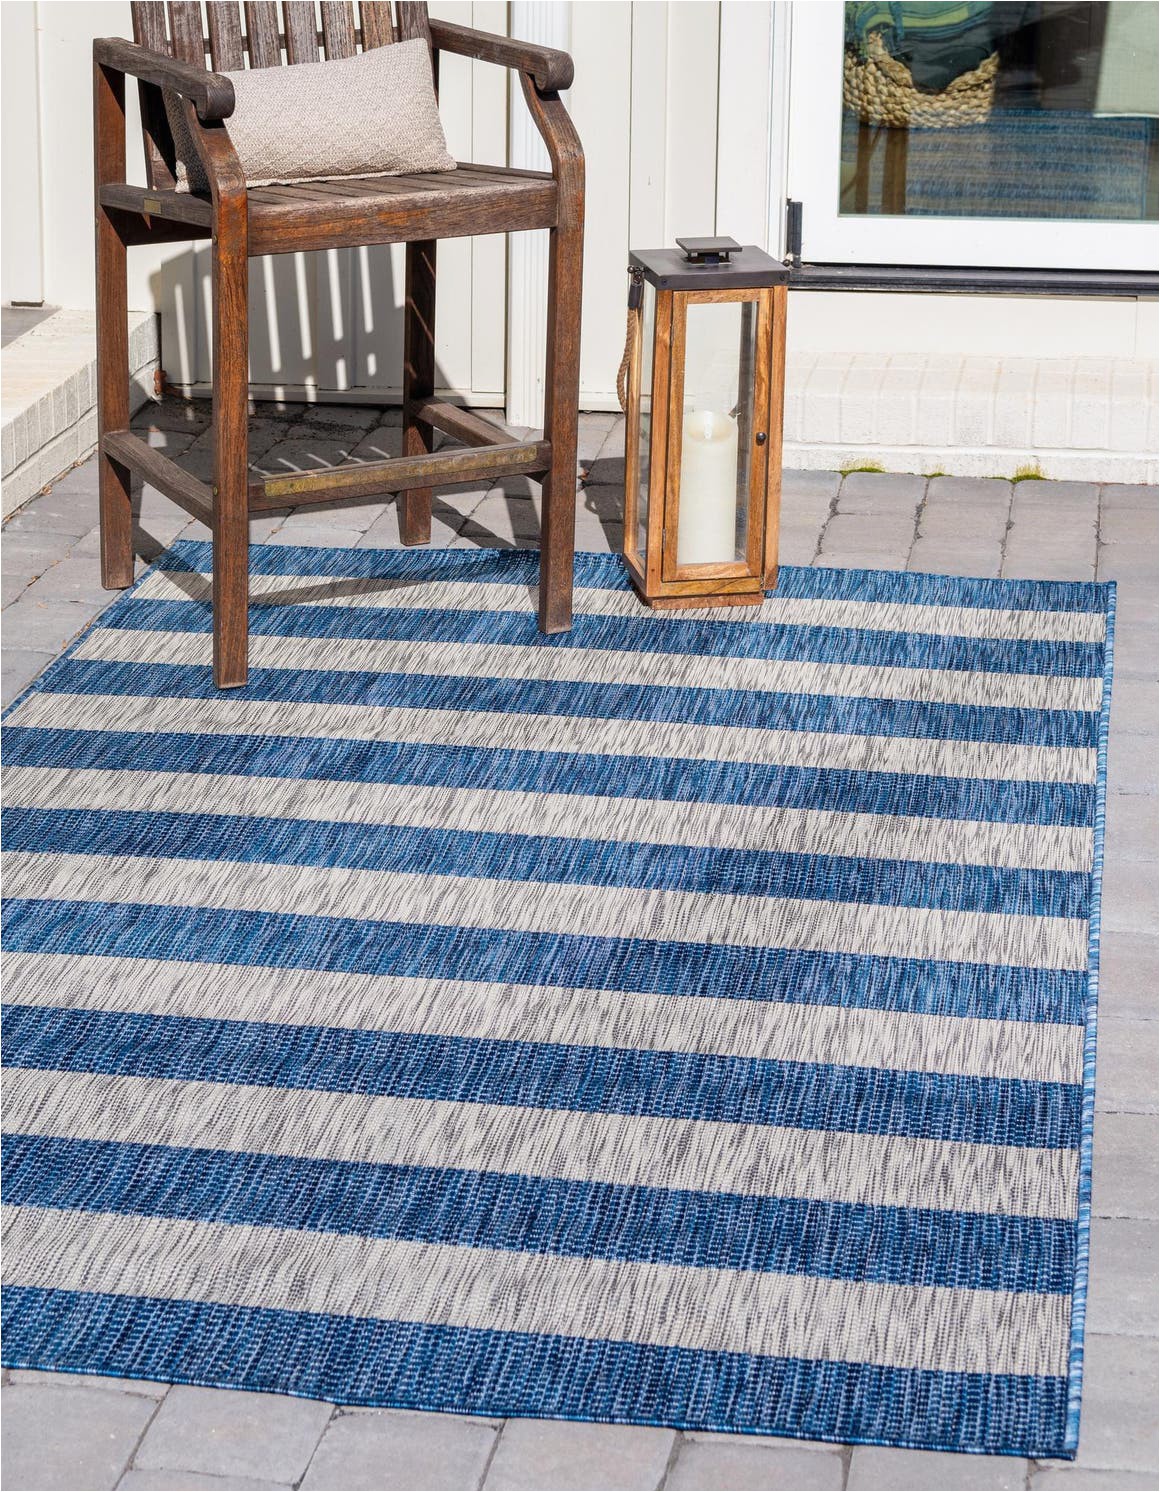 4×6 Blue Outdoor Rugs 4 X 6 Outdoor Striped Rug